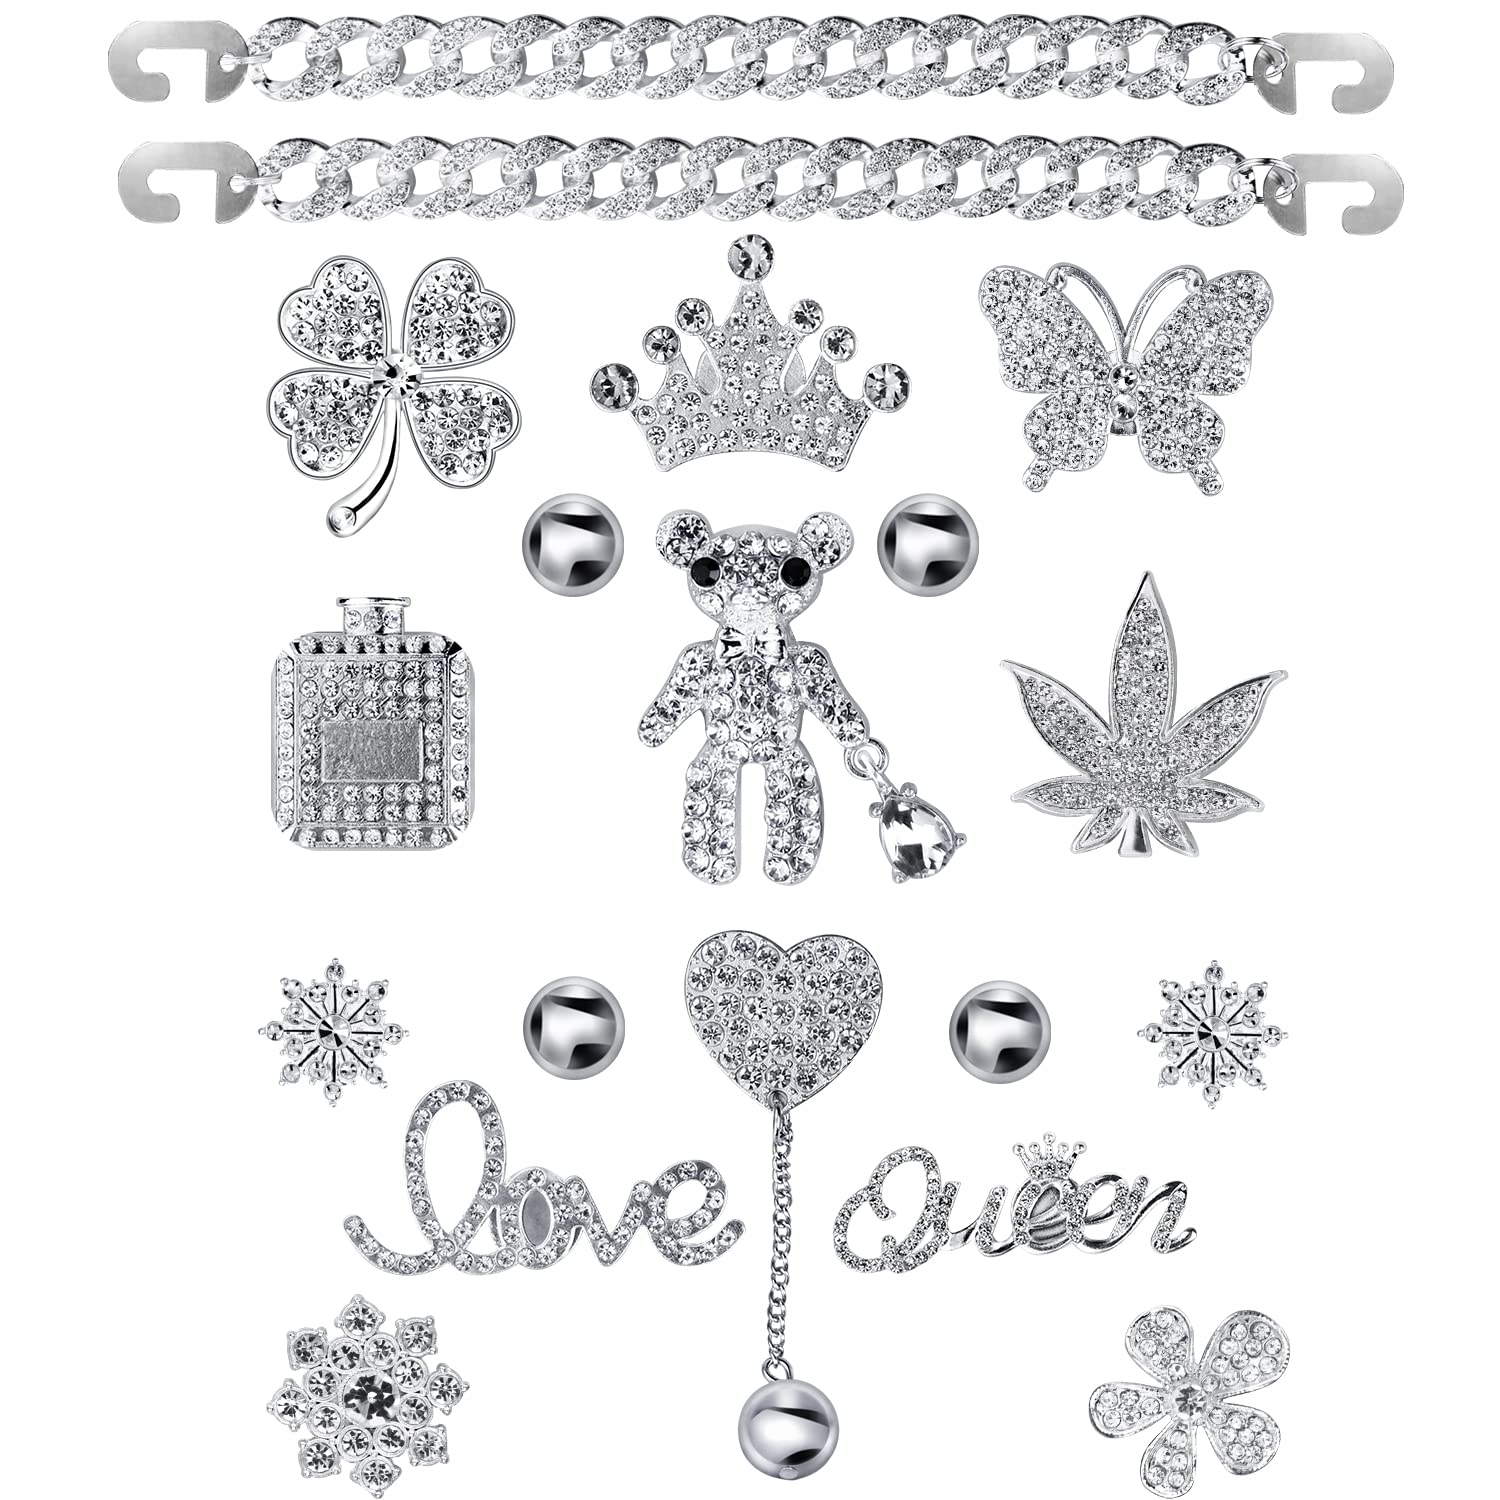 Designer Croc Charms on X: Check out All the Rhinestone Jibbitz